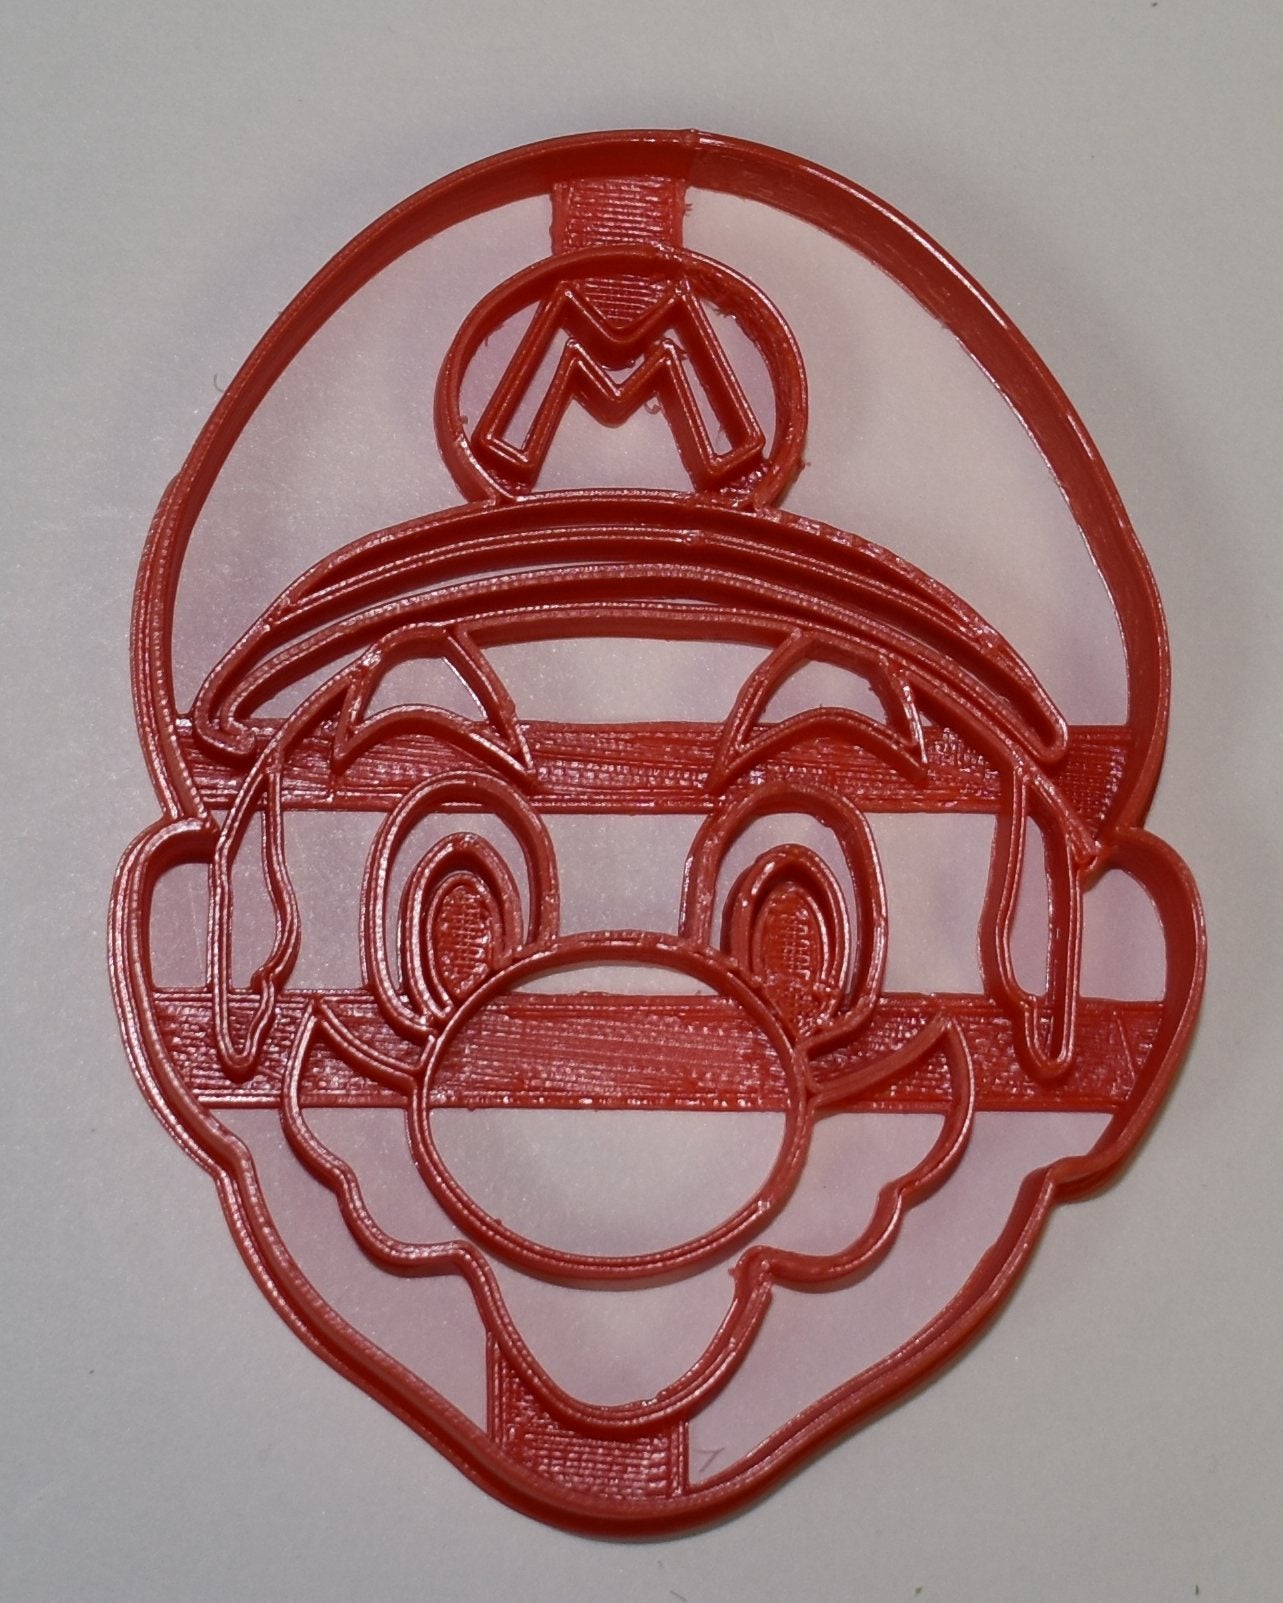 6x Mario Video Game Character Fondant Cutter Cupcake Topper Size 1.75" USA FD747